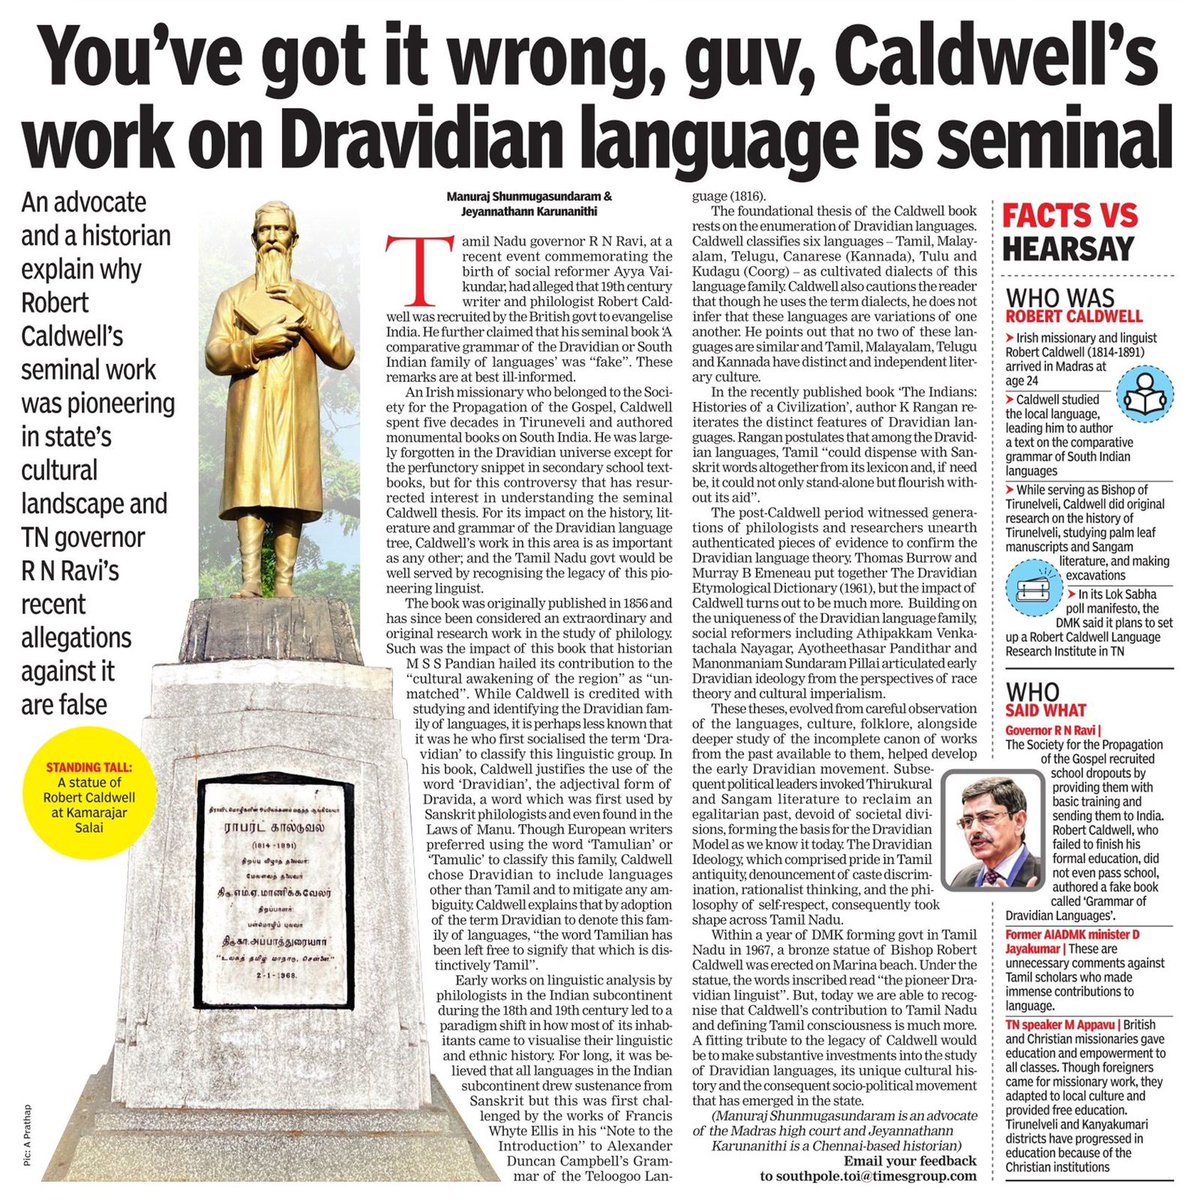 For today’s @TOIIndiaNews (Chennai edition), @manuraj1983 and Jeyan have written about Robert Caldwell who is accredited with using (and choosing) the word 'Dravidian' for the first time and popularising it through his study of the Dravidian Language Family. Caldwell made his